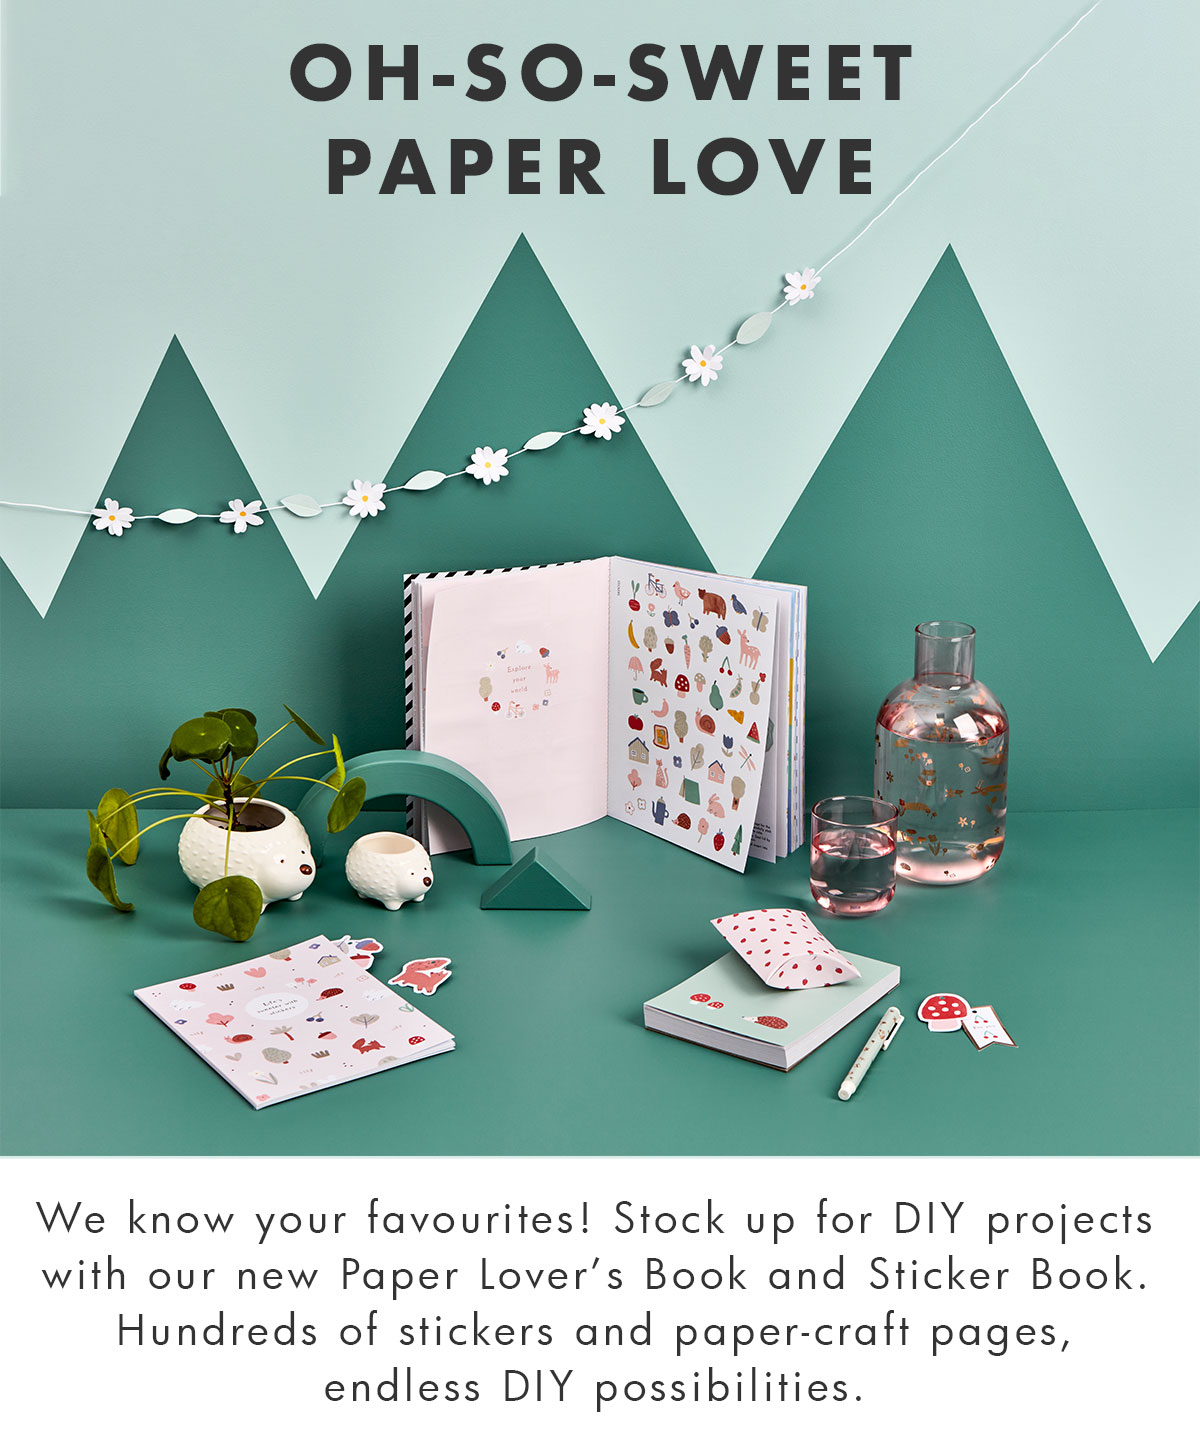 Oh-so sweet paper love. 